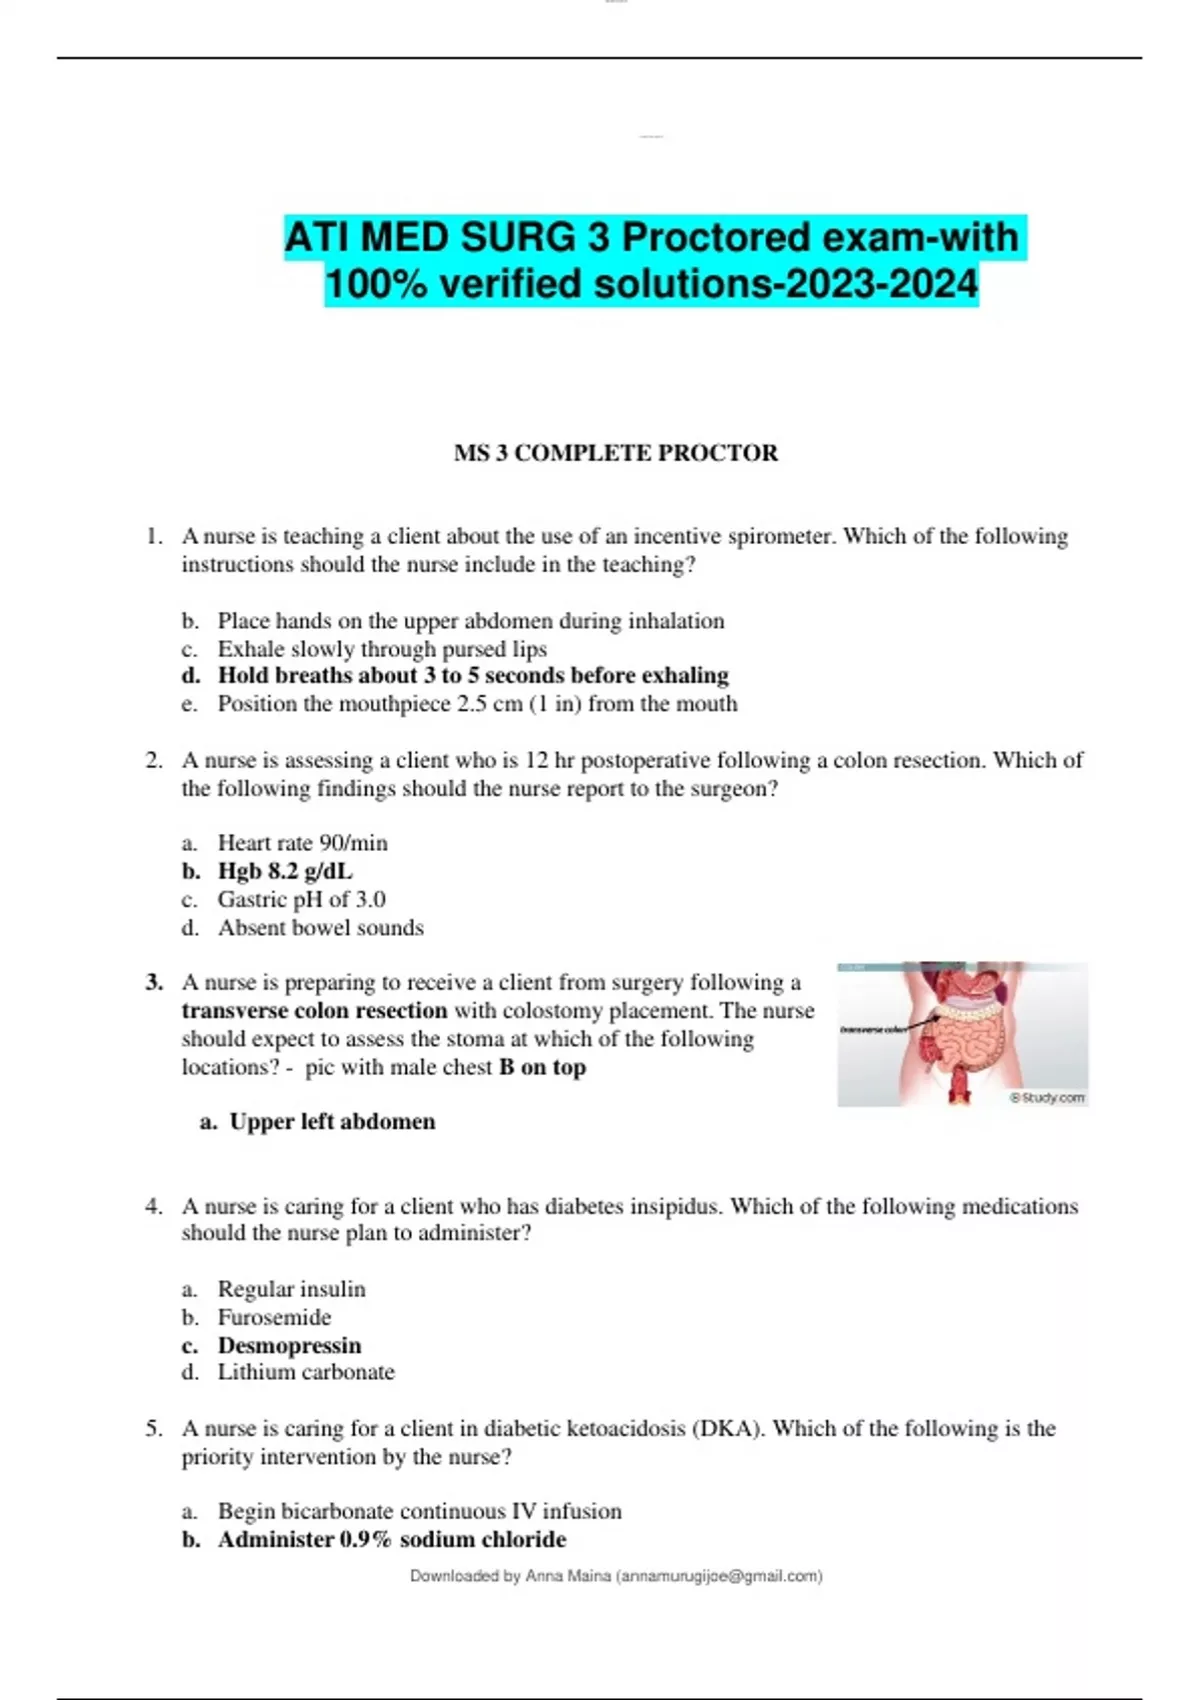 ATI MED SURG 3 Proctored examwith 100 verified solutions20232024